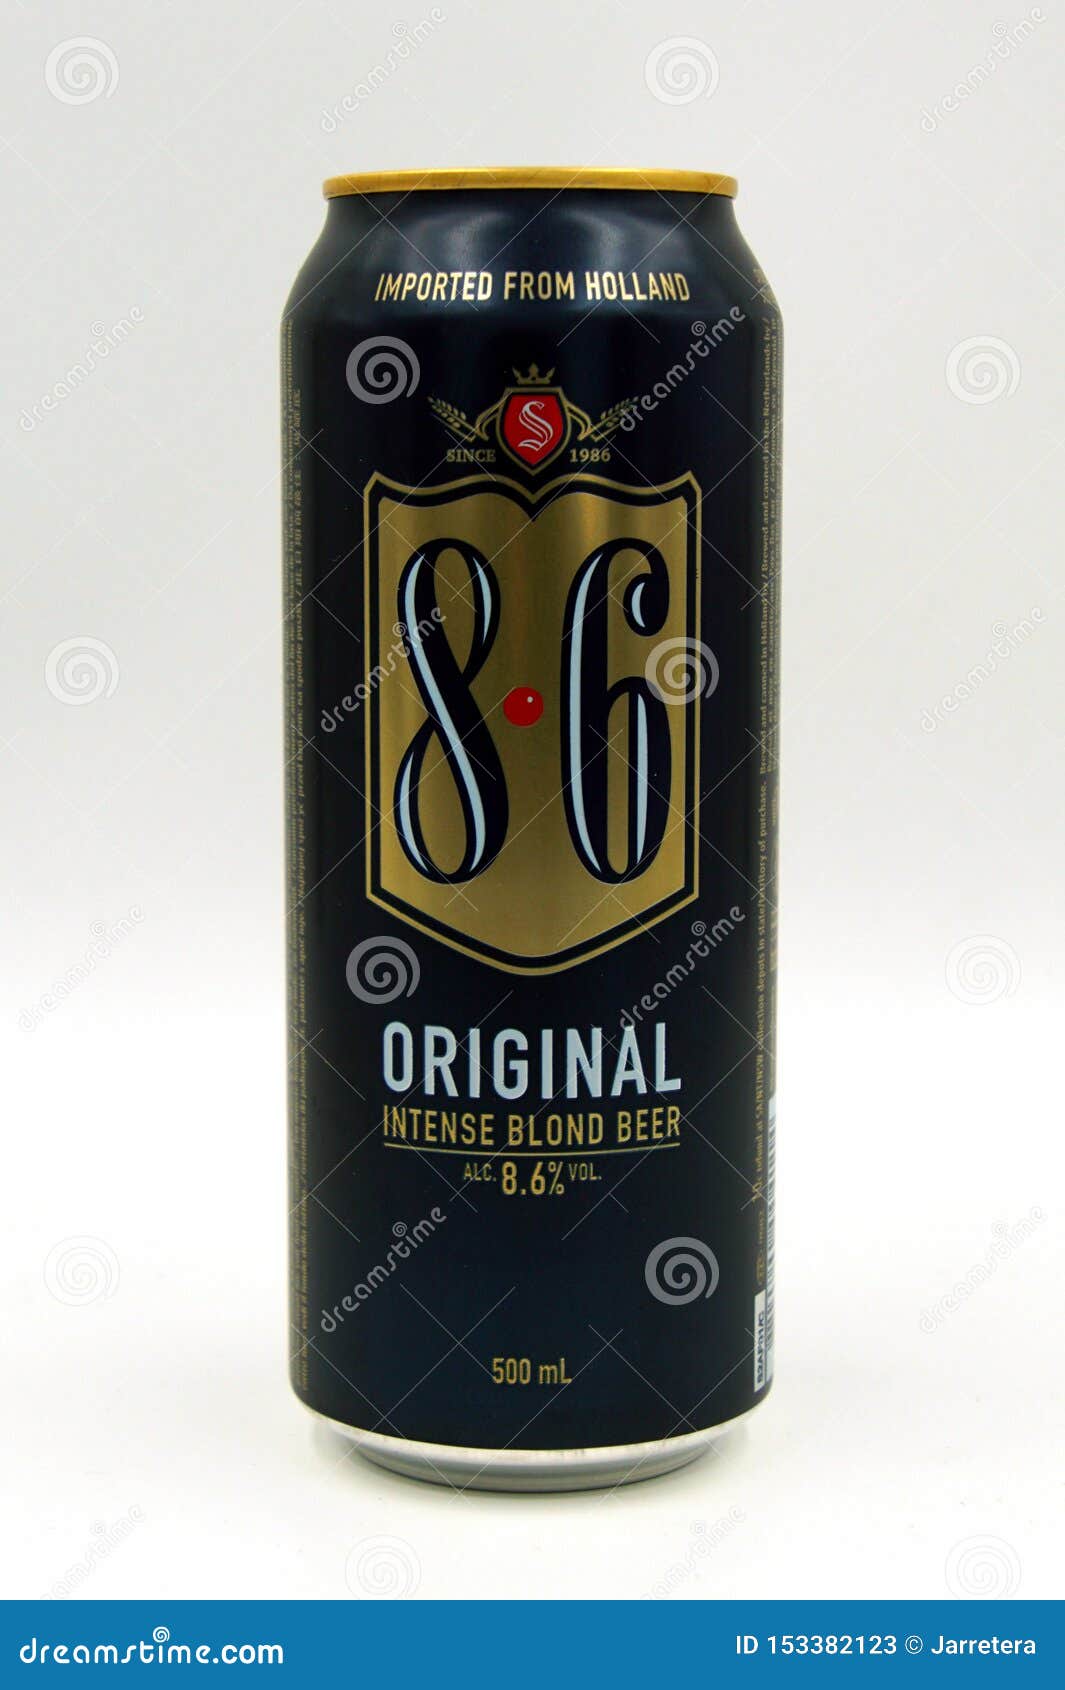 sector Stap Necklet Bavaria 8.6 Original beer. editorial stock photo. Image of lager - 153382123